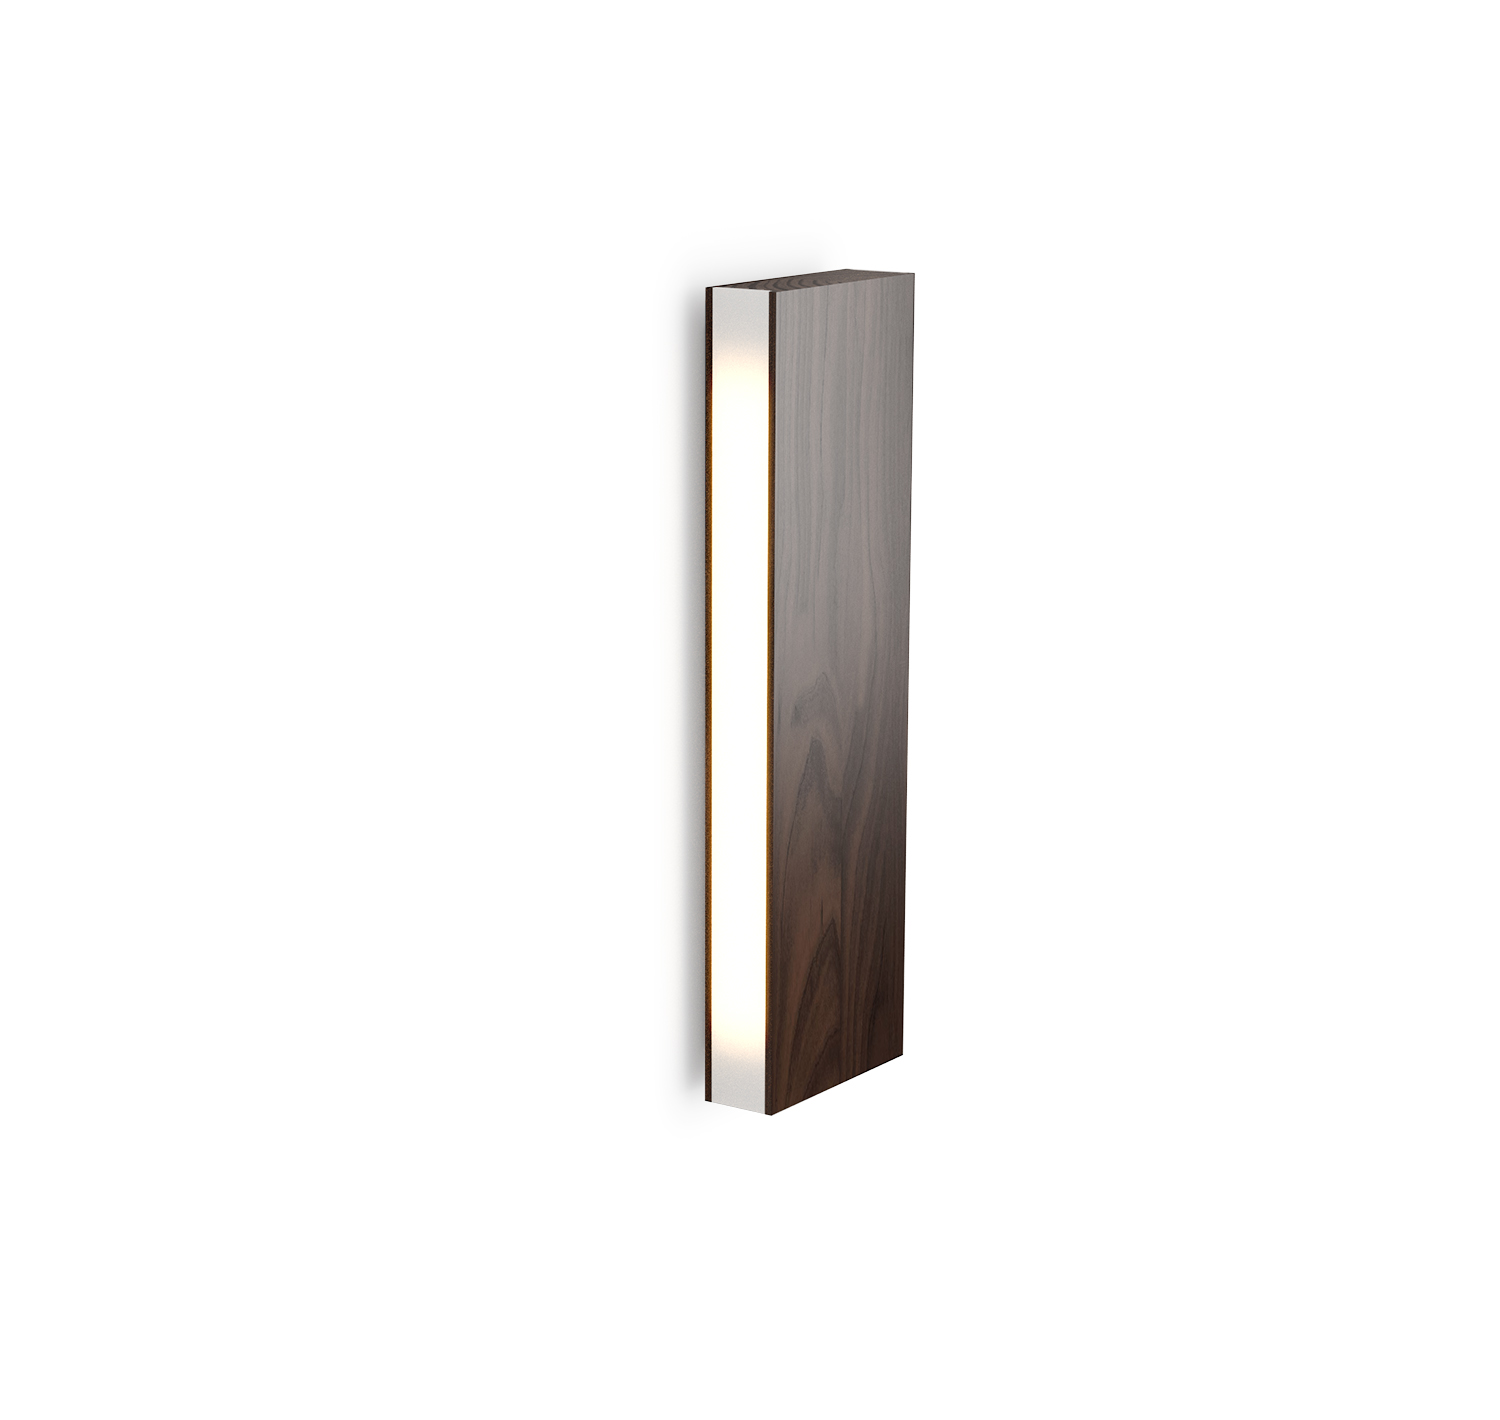 Woodlin by Tunto – 7 7/8″ x 4 3/4″ Surface, Sconce offers quality European interior lighting design | Zaneen Design